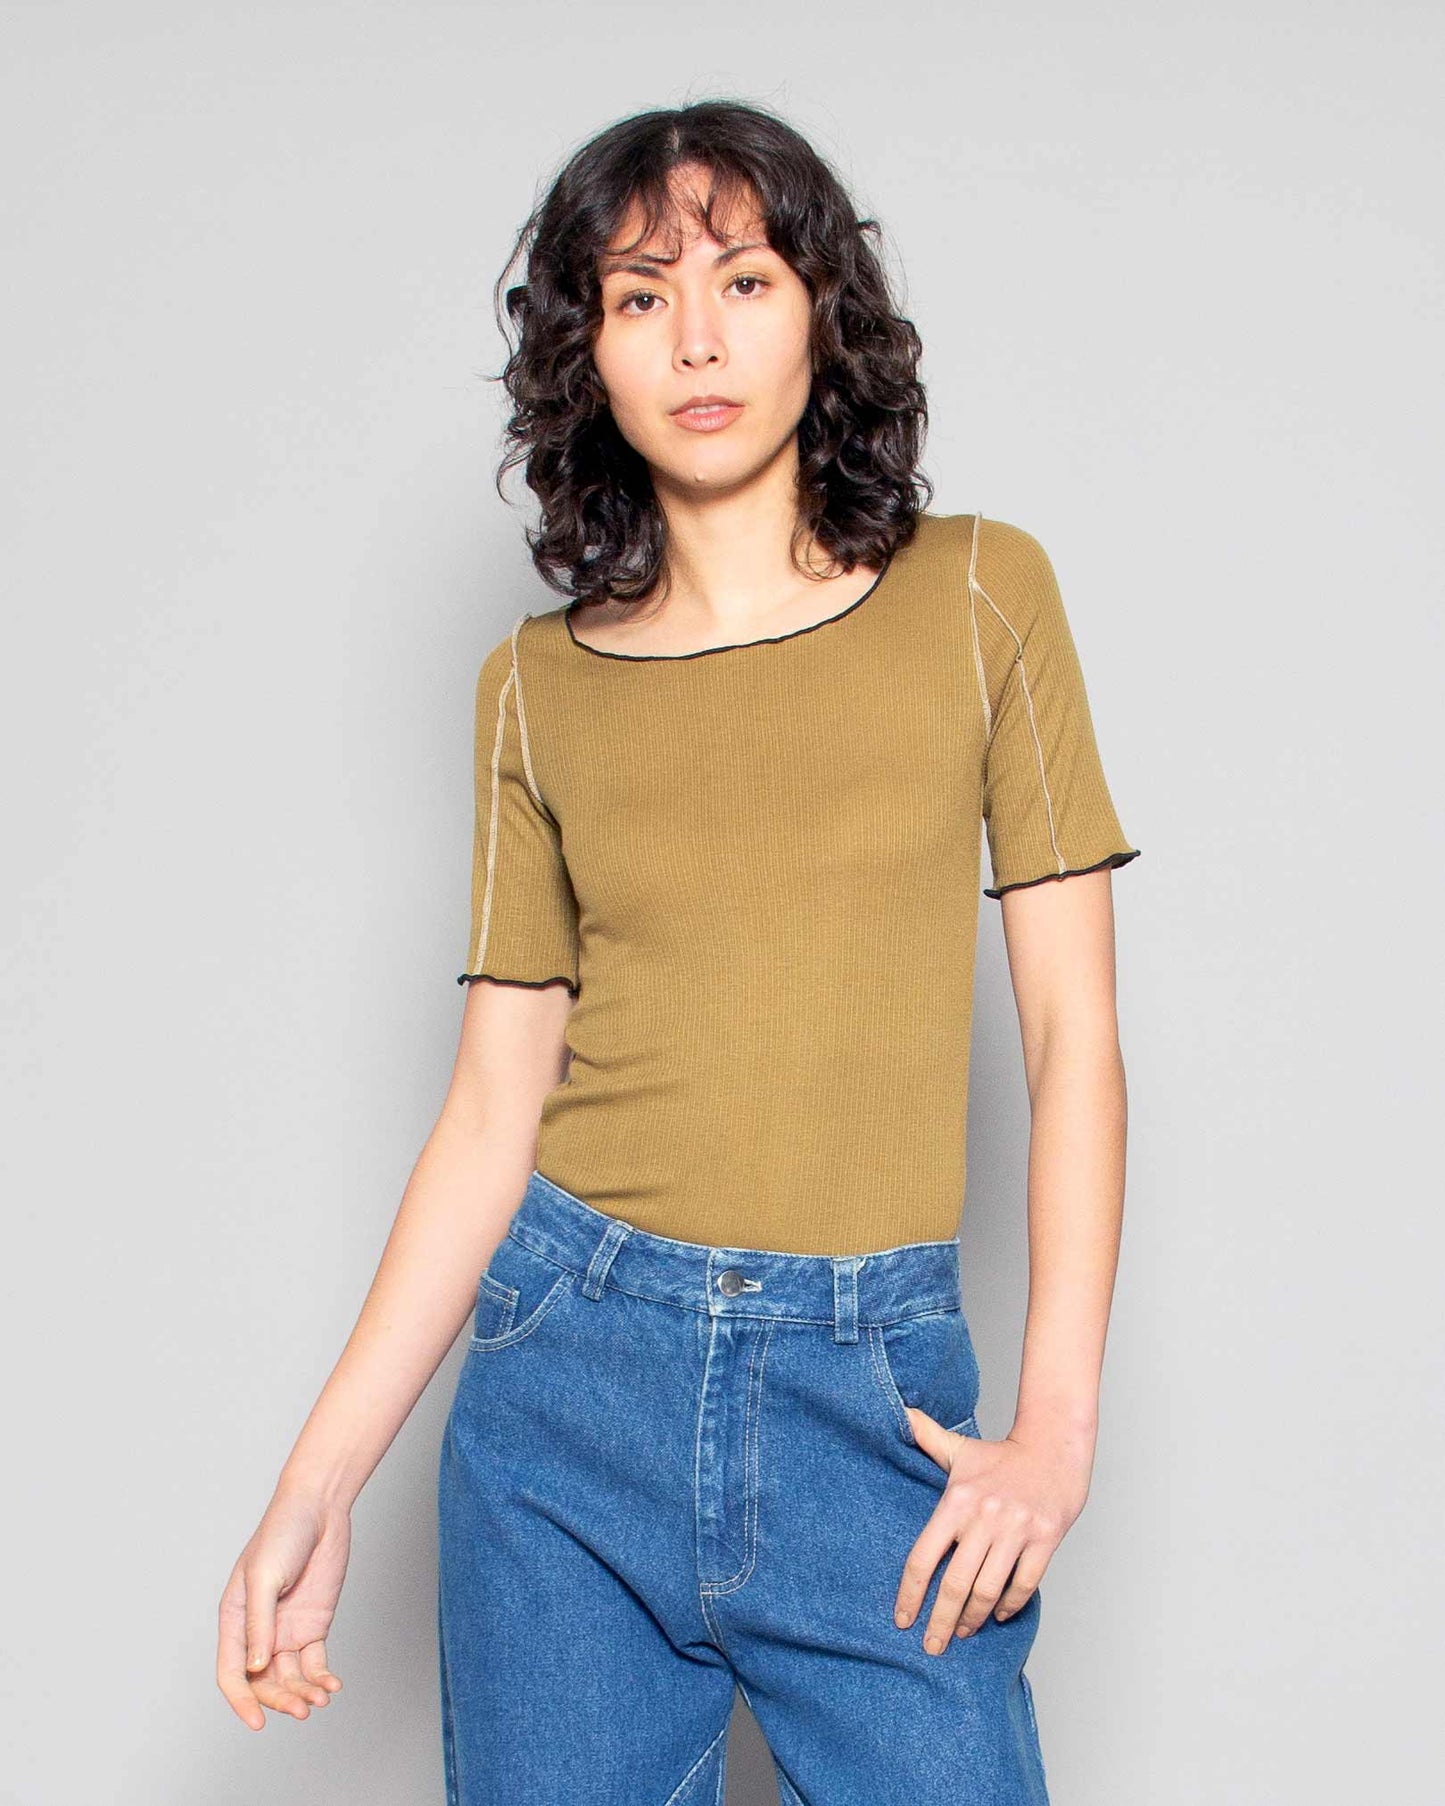 PERSONS Hayes Contrast Rib Tee in Olive available at Lahn.shop